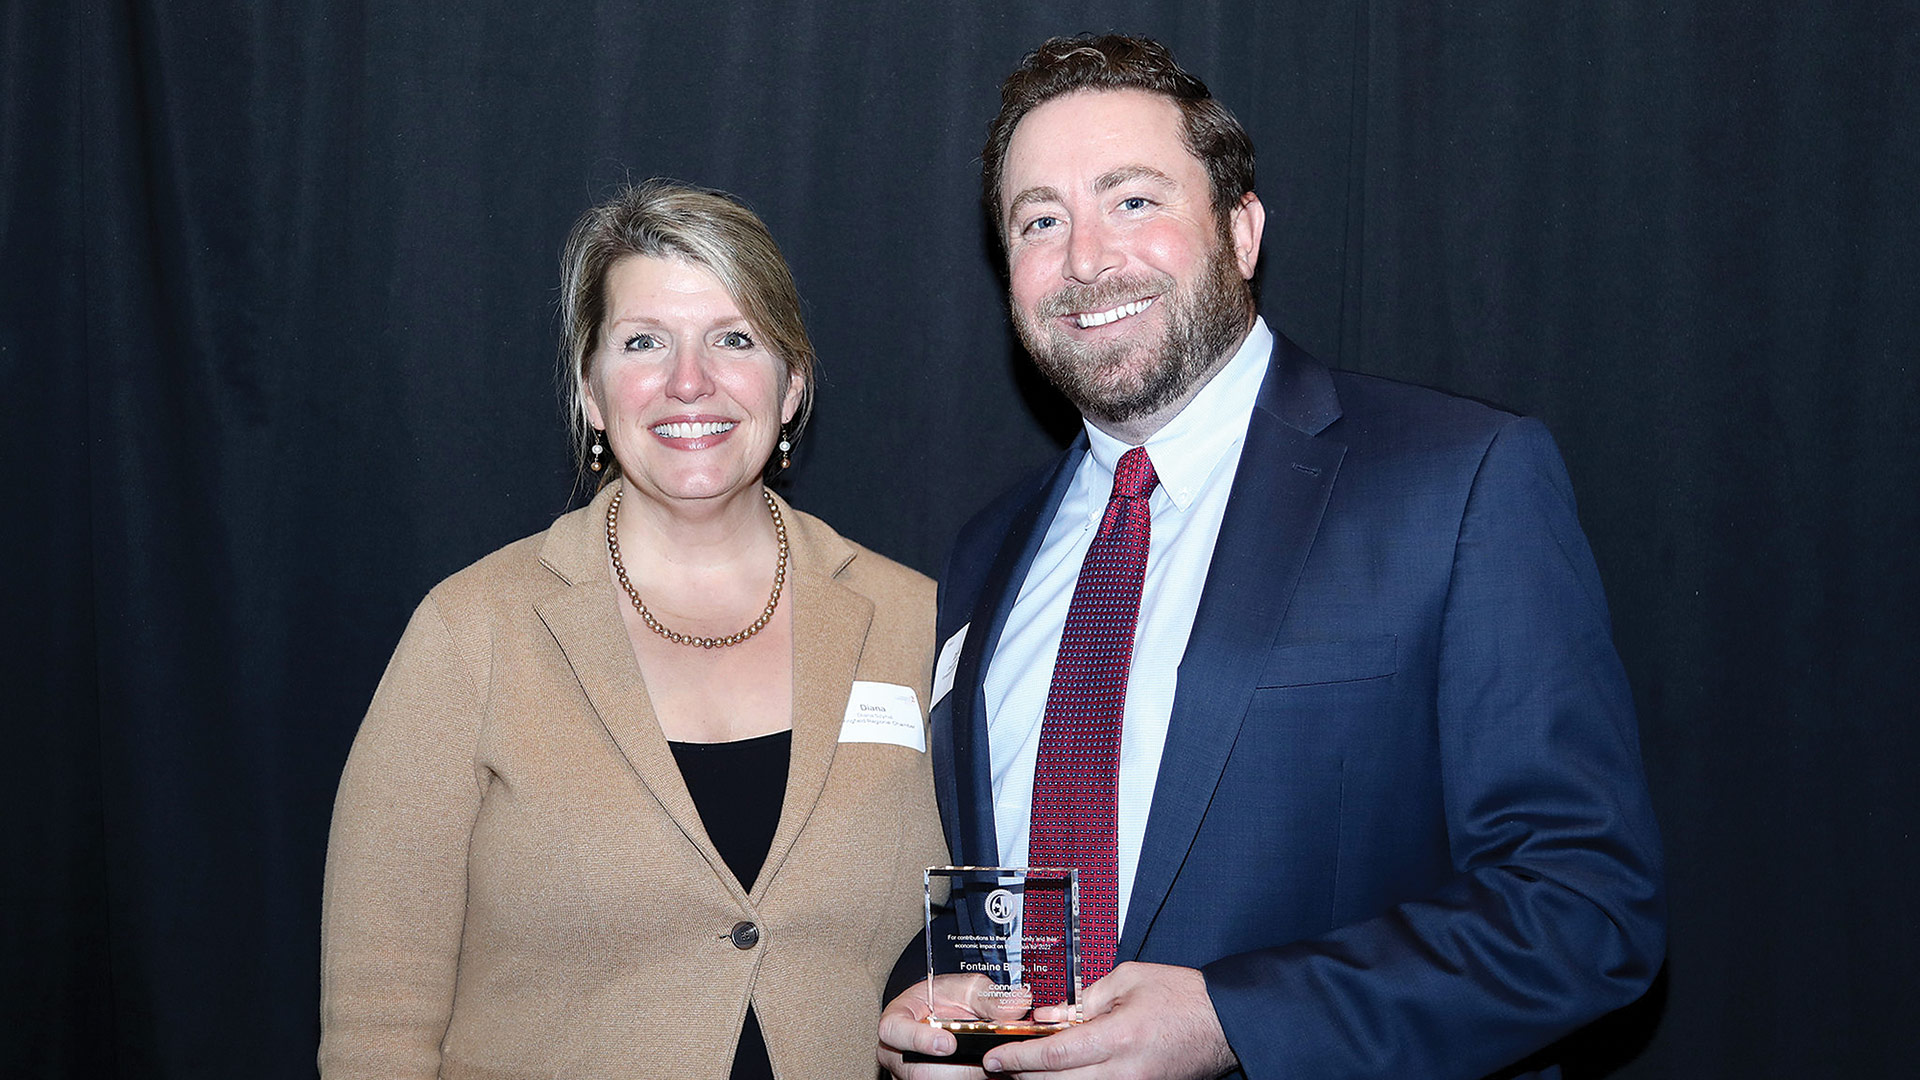 chamber President Diana Szynal with Dave Fontaine Jr., CEO of Fontaine Brothers.